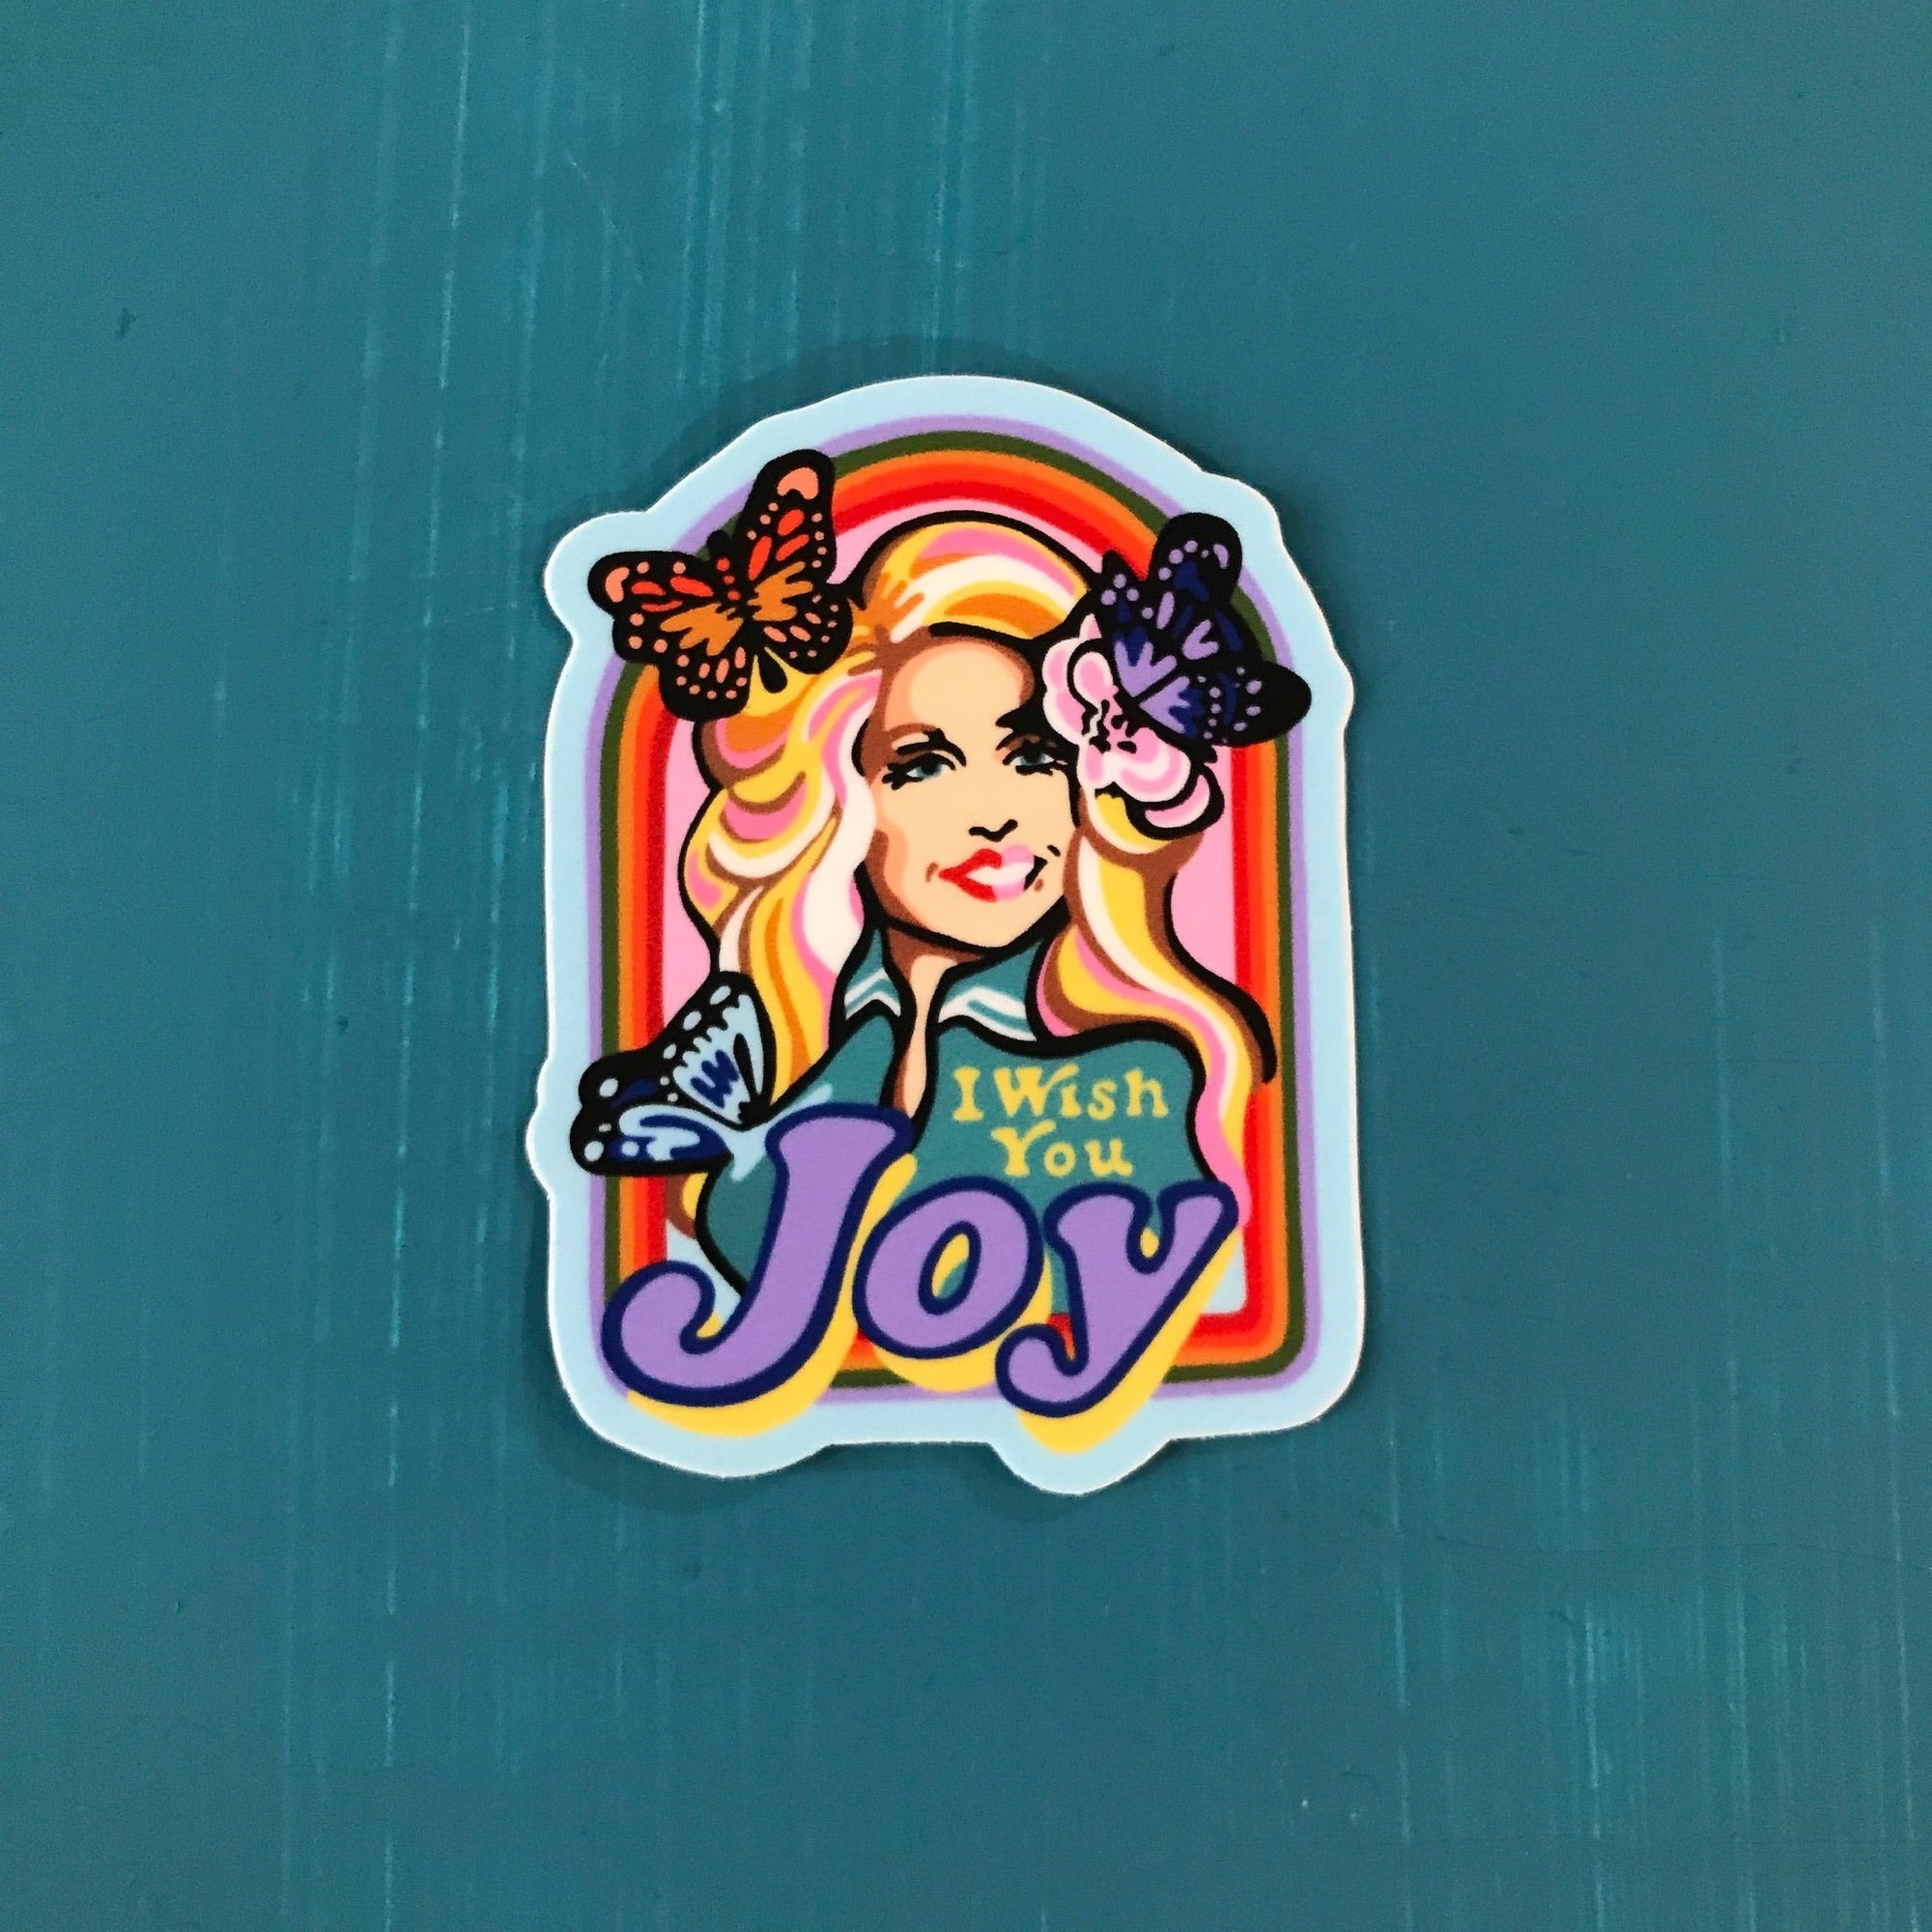 Vinyl sticker with an illustration of Dolly Parton. It says "I wish you joy" and she has butterflies in her hair. 